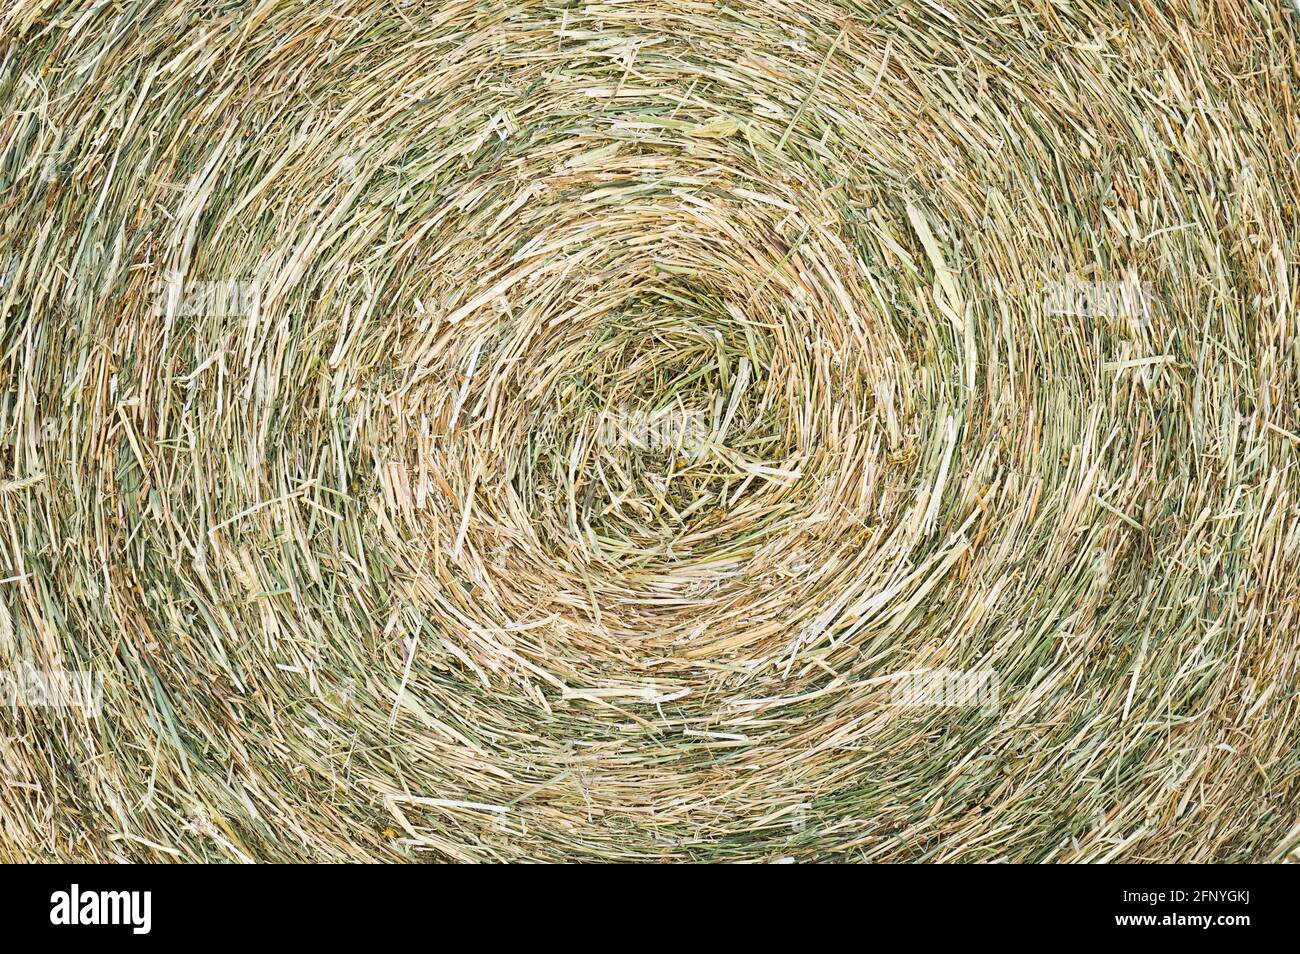 Texture of hay stack, closeup natural background Stock Photo